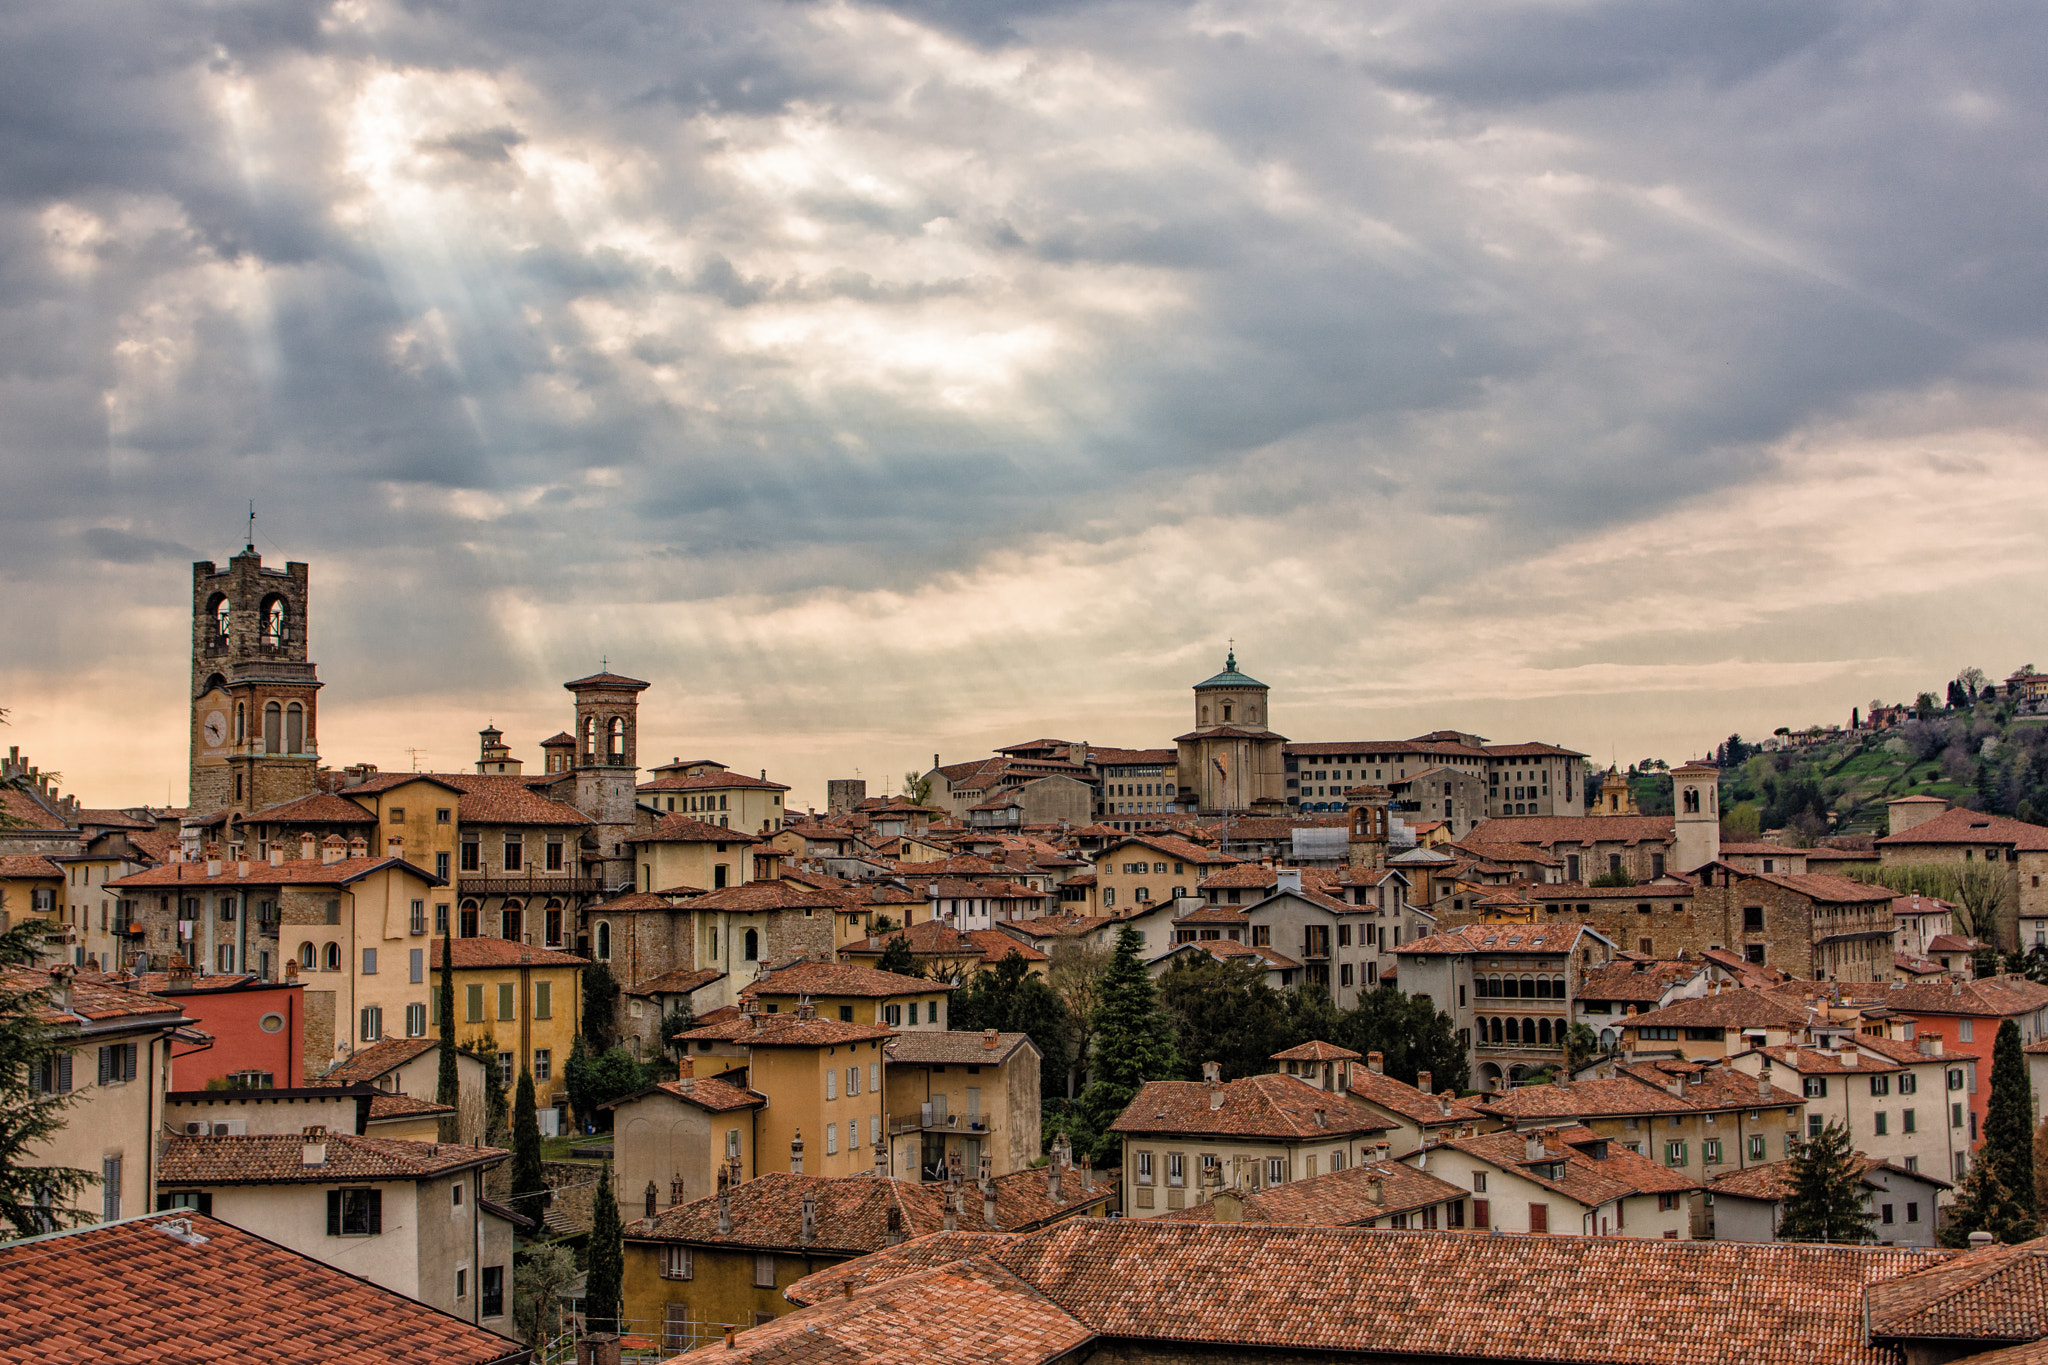 Nikon D7200 + Sigma 17-70mm F2.8-4 DC Macro OS HSM | C sample photo. Clou∂s on the roofs photography